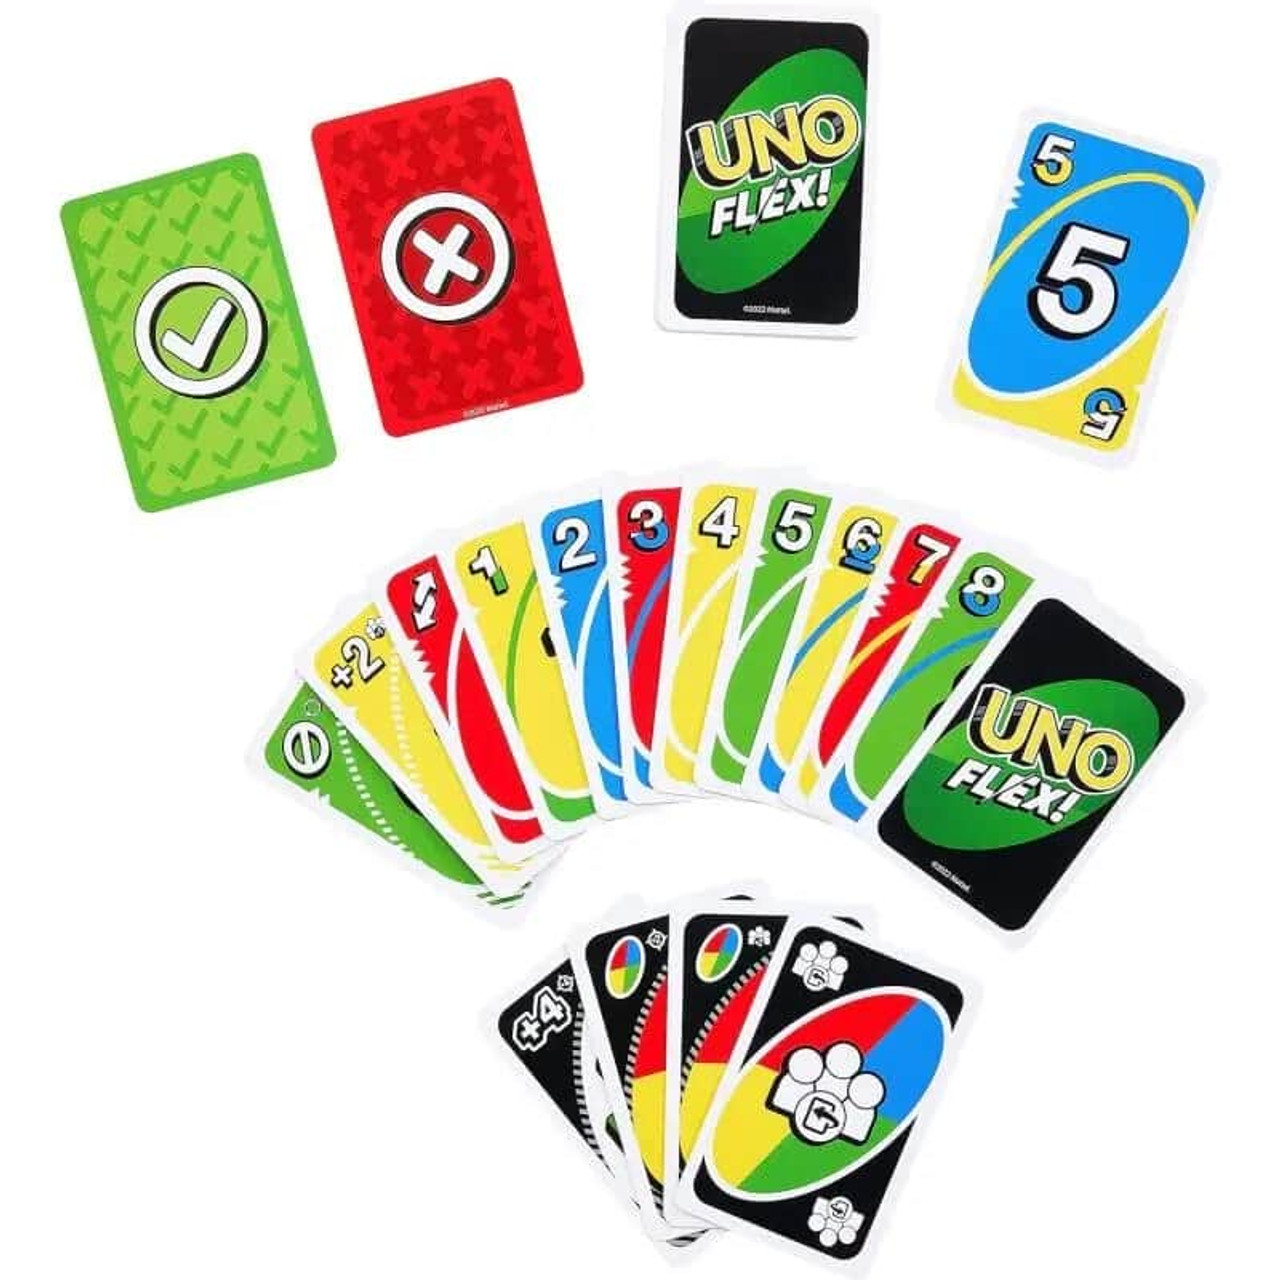 Uno Flex Flip Dos Matching Card Game Anime Pokemon Pikachu Multiplayer Family Party Boardgame Funny Friends Entertainment Poker